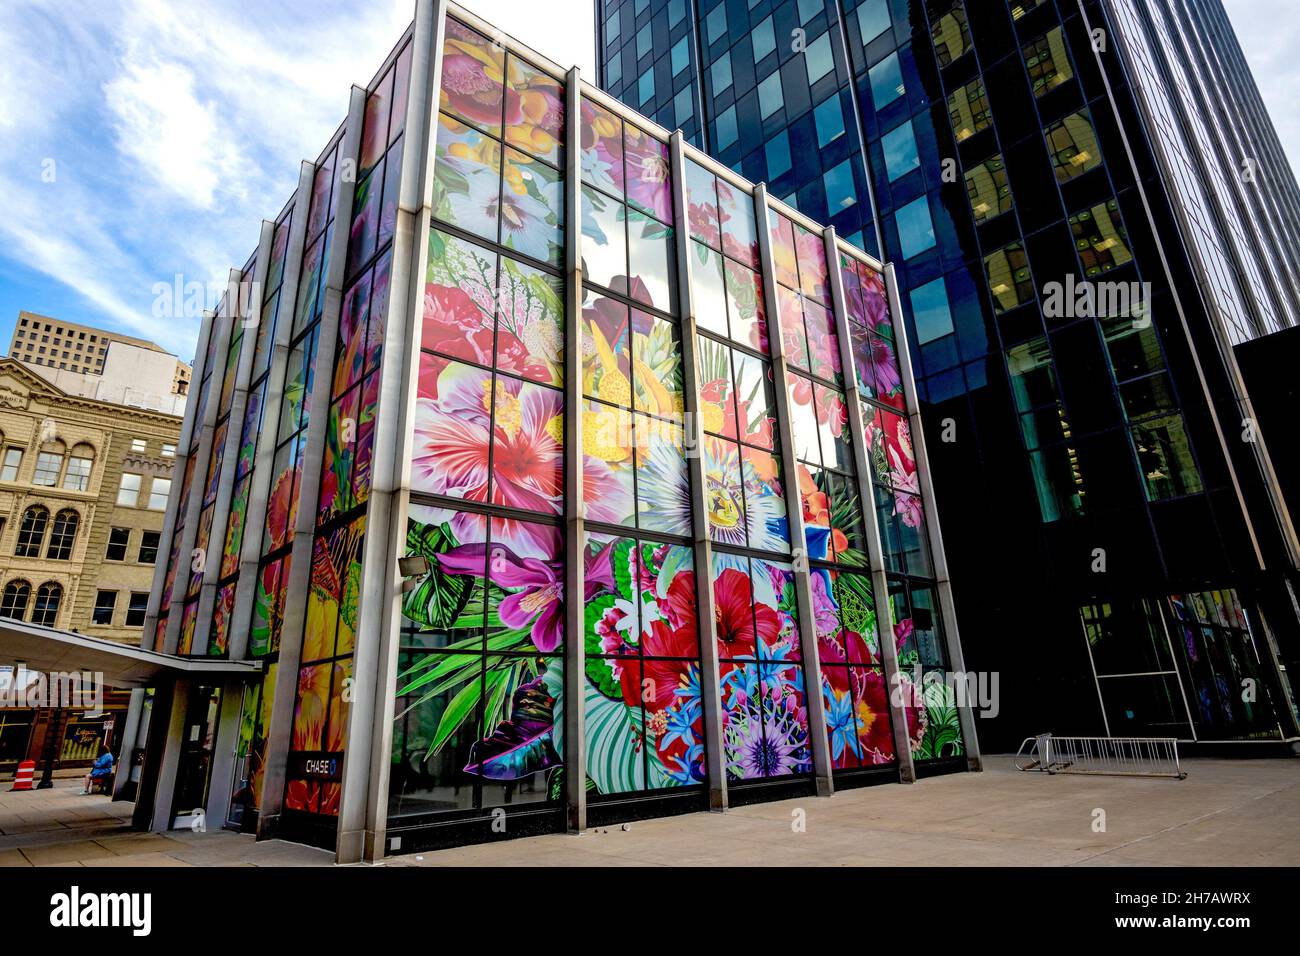 As part of the Sculpture Milwaukee project in 2019, Chicago-based artist Carlos Rolón supervised an installation of 160 vinyl panels for the exterior of the two-story glass lobby of Chase Tower, turning it into a diorama of tropical flowers called “Gild The Lilly.” It is the biggest piece in Sculpture Milwaukee’s history. Stock Photo